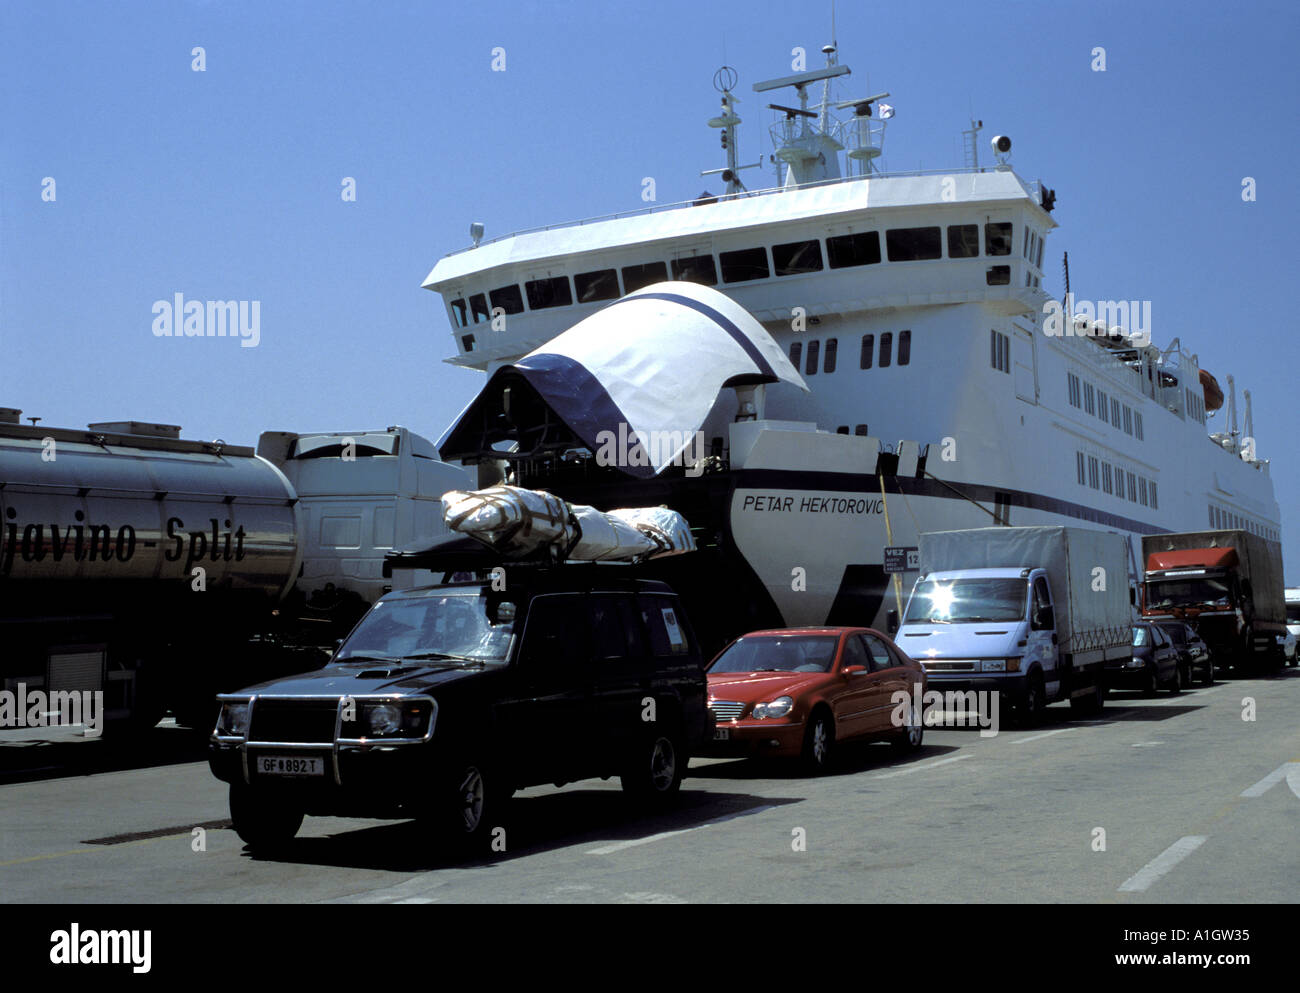 Cars and vans queueing to board Car Ferry Liner Jadrolinija docked at Stock  Photo - Alamy